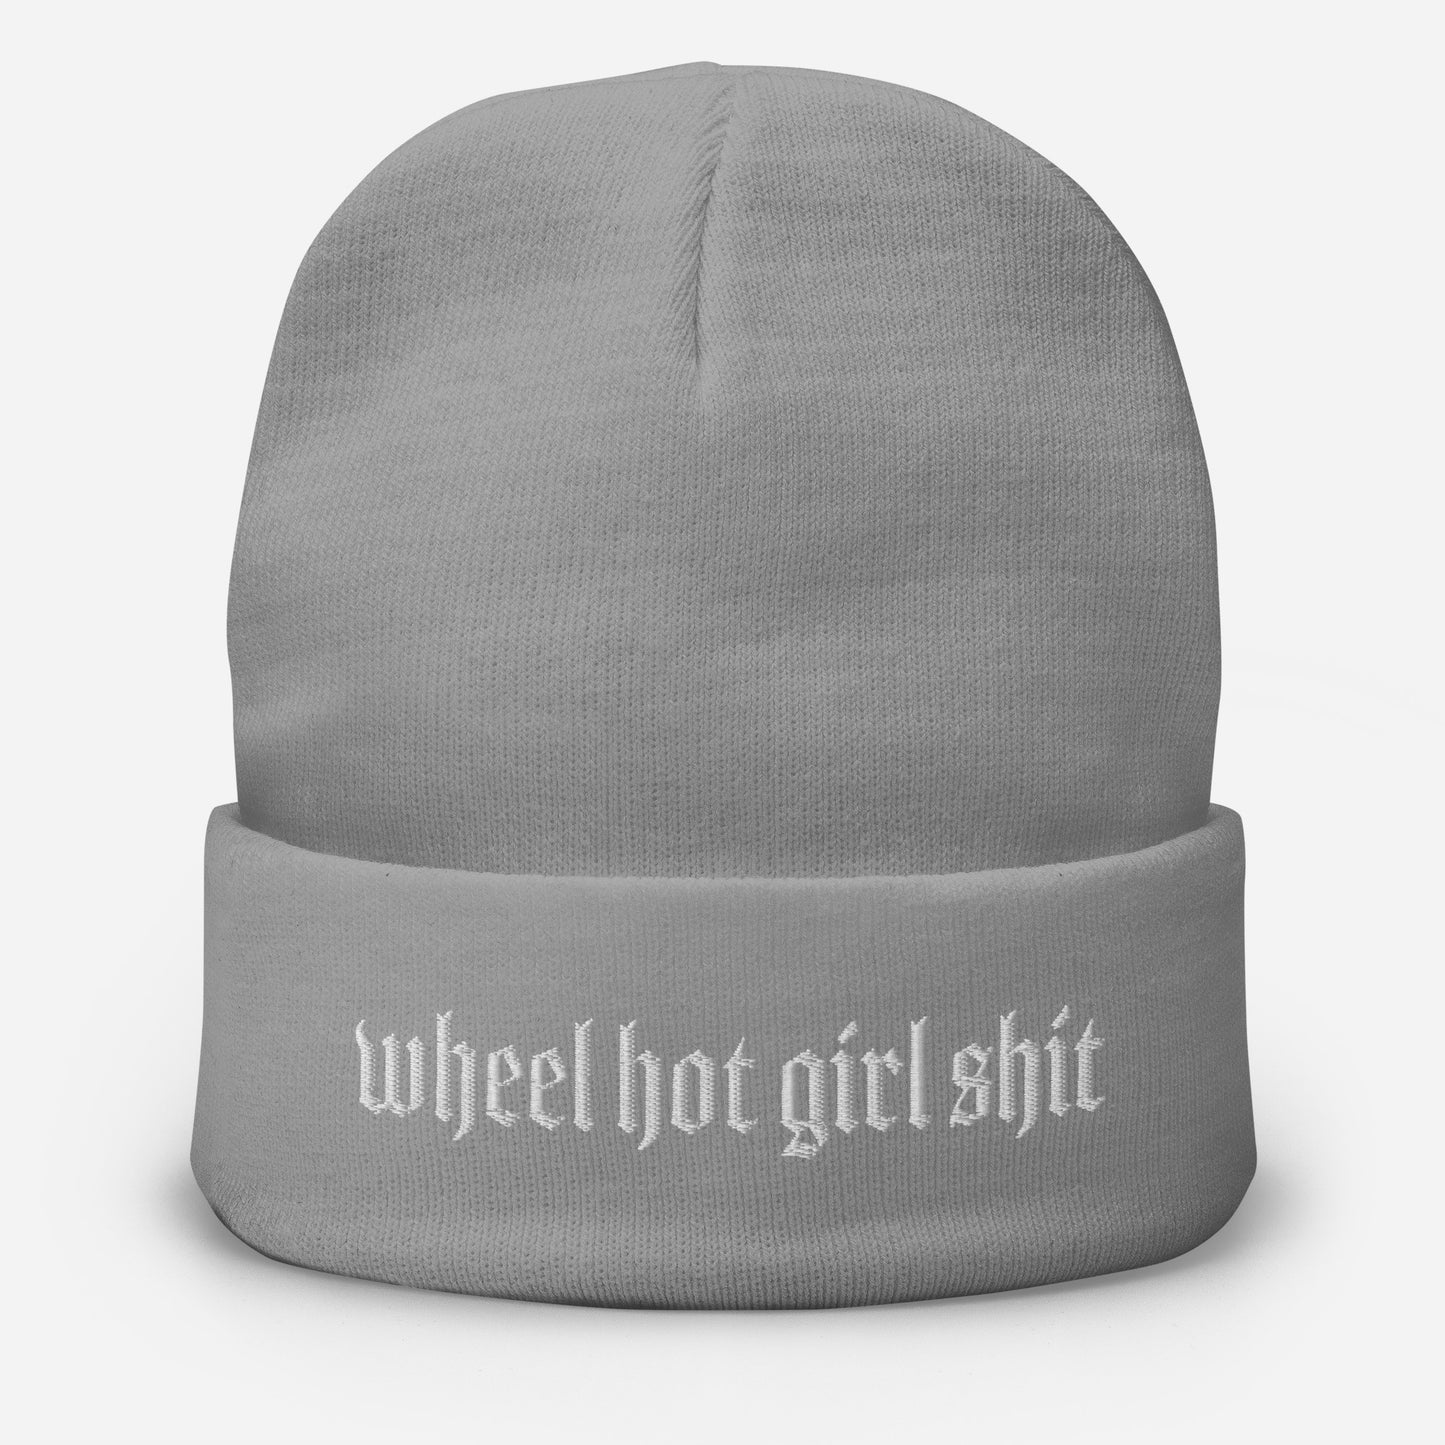 Wheel Hot Girl Shit Embroidered Beanie